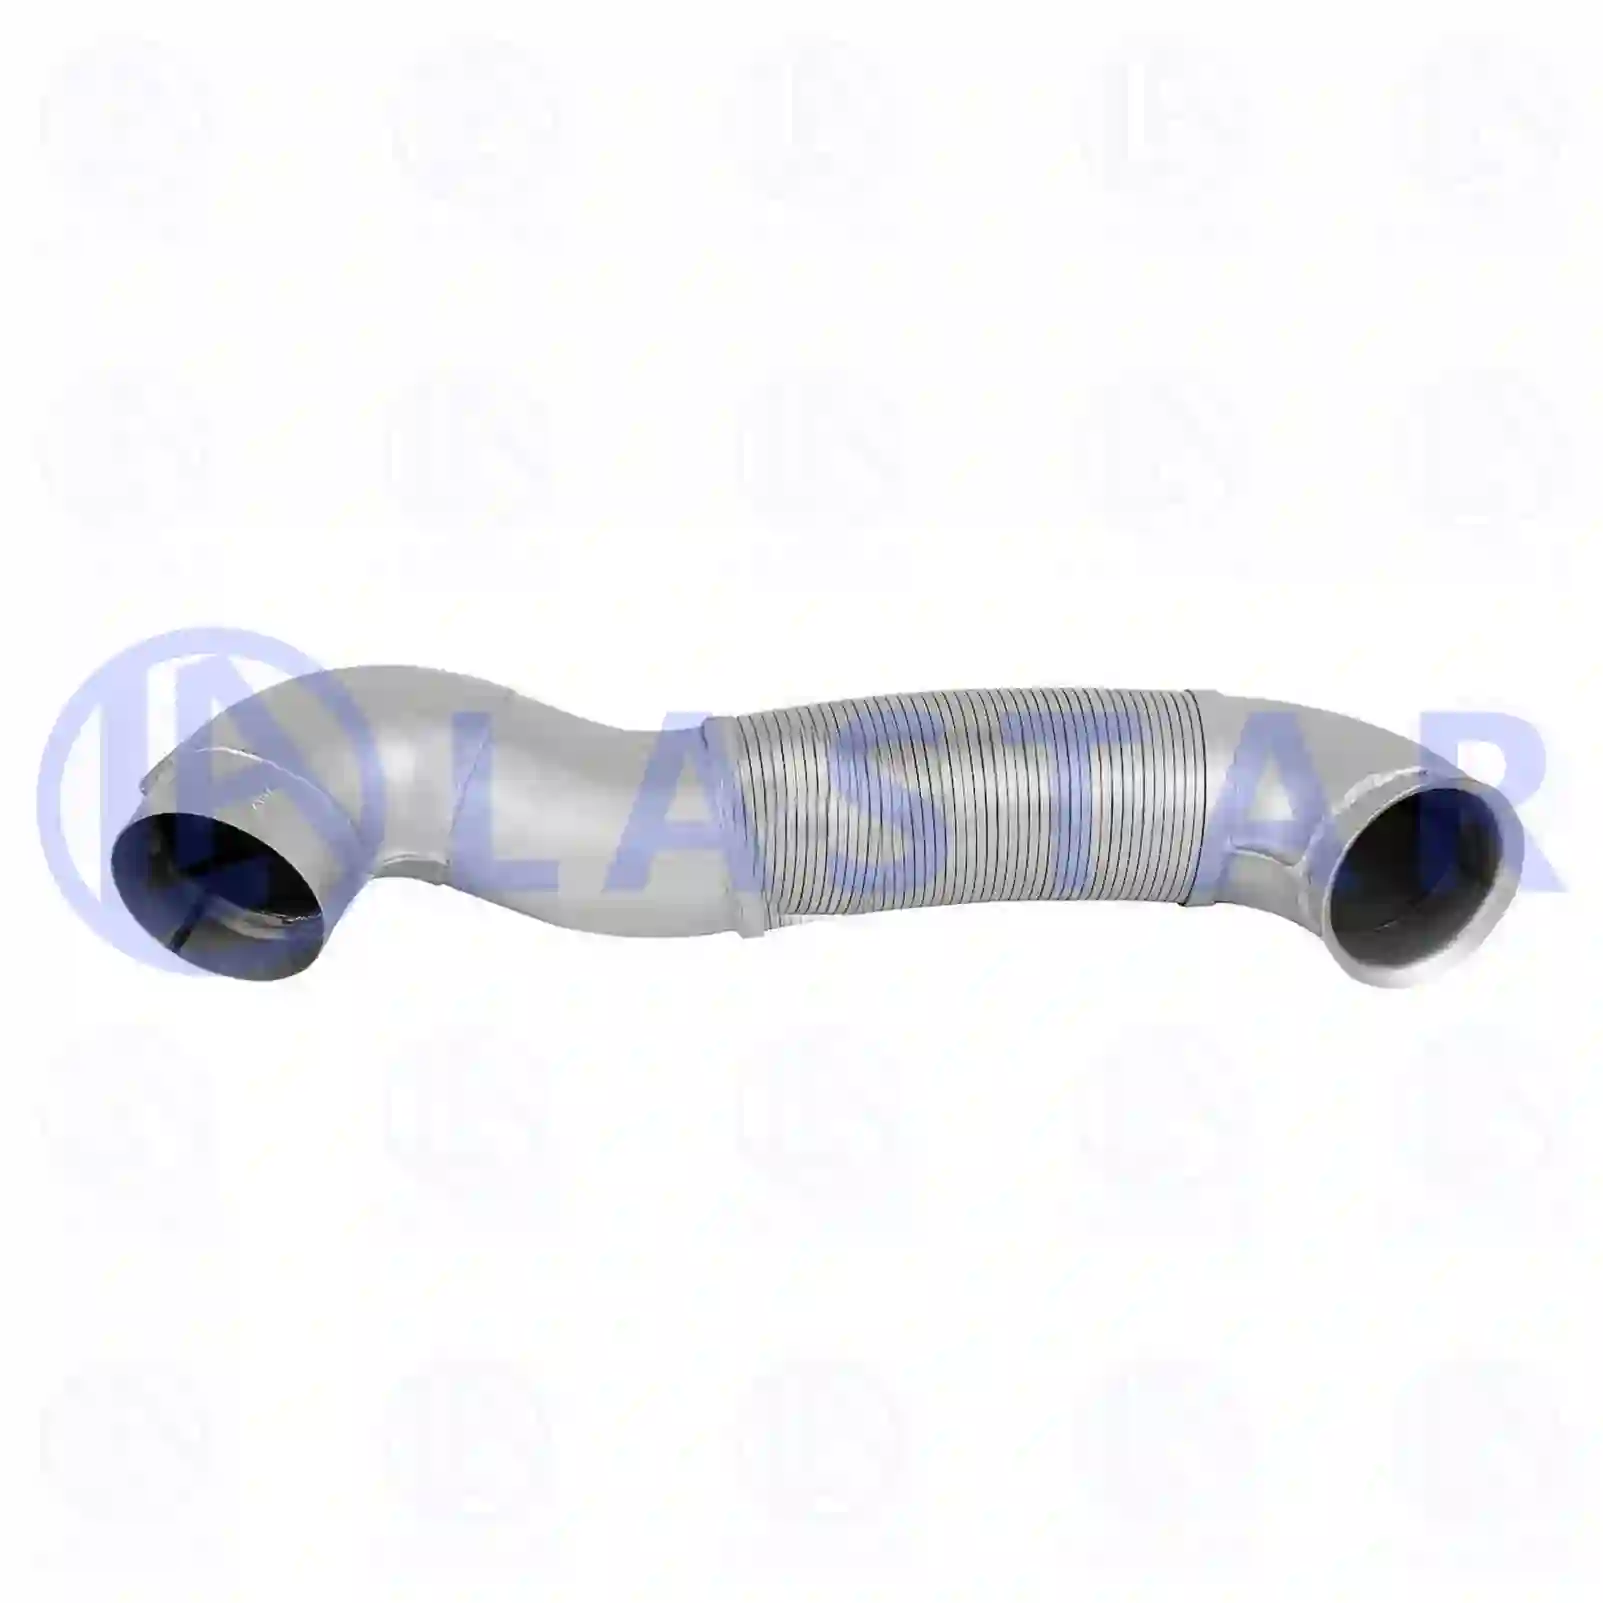 Exhaust pipe, 77706341, 9484904519, 94849 ||  77706341 Lastar Spare Part | Truck Spare Parts, Auotomotive Spare Parts Exhaust pipe, 77706341, 9484904519, 94849 ||  77706341 Lastar Spare Part | Truck Spare Parts, Auotomotive Spare Parts